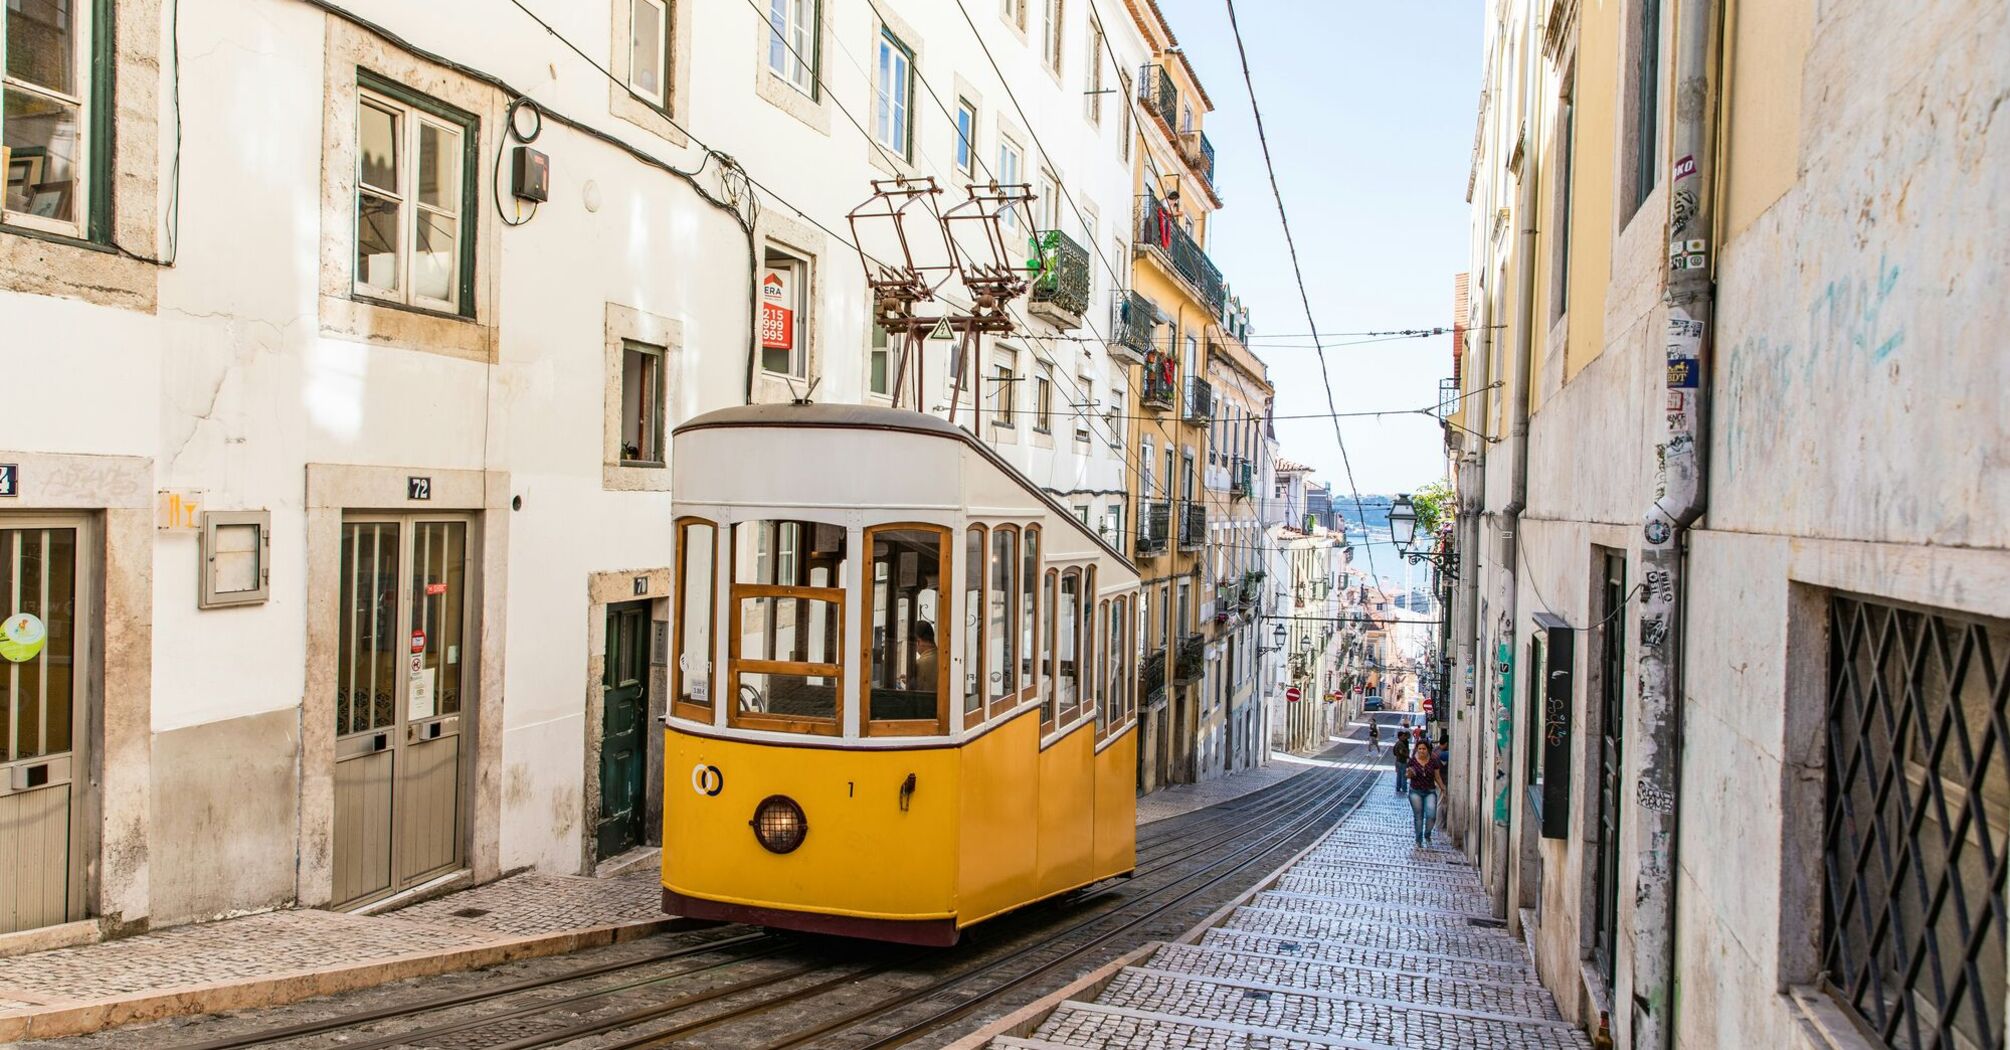 Yellow and white tram on street during daytime in Lisbon